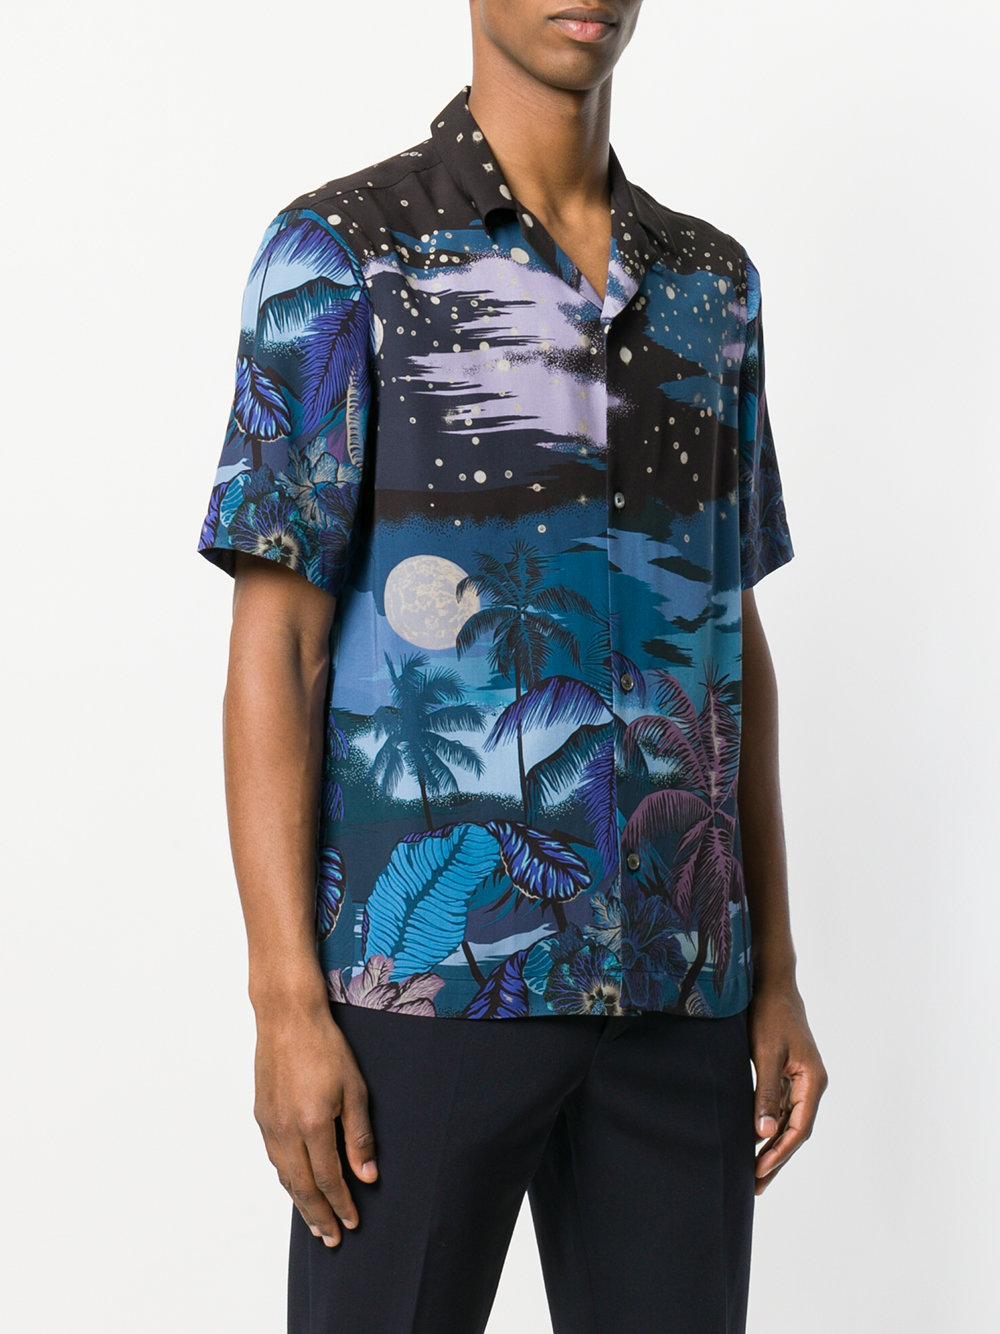 Paul Smith Midnight Print Shirt in Blue for Men - Lyst